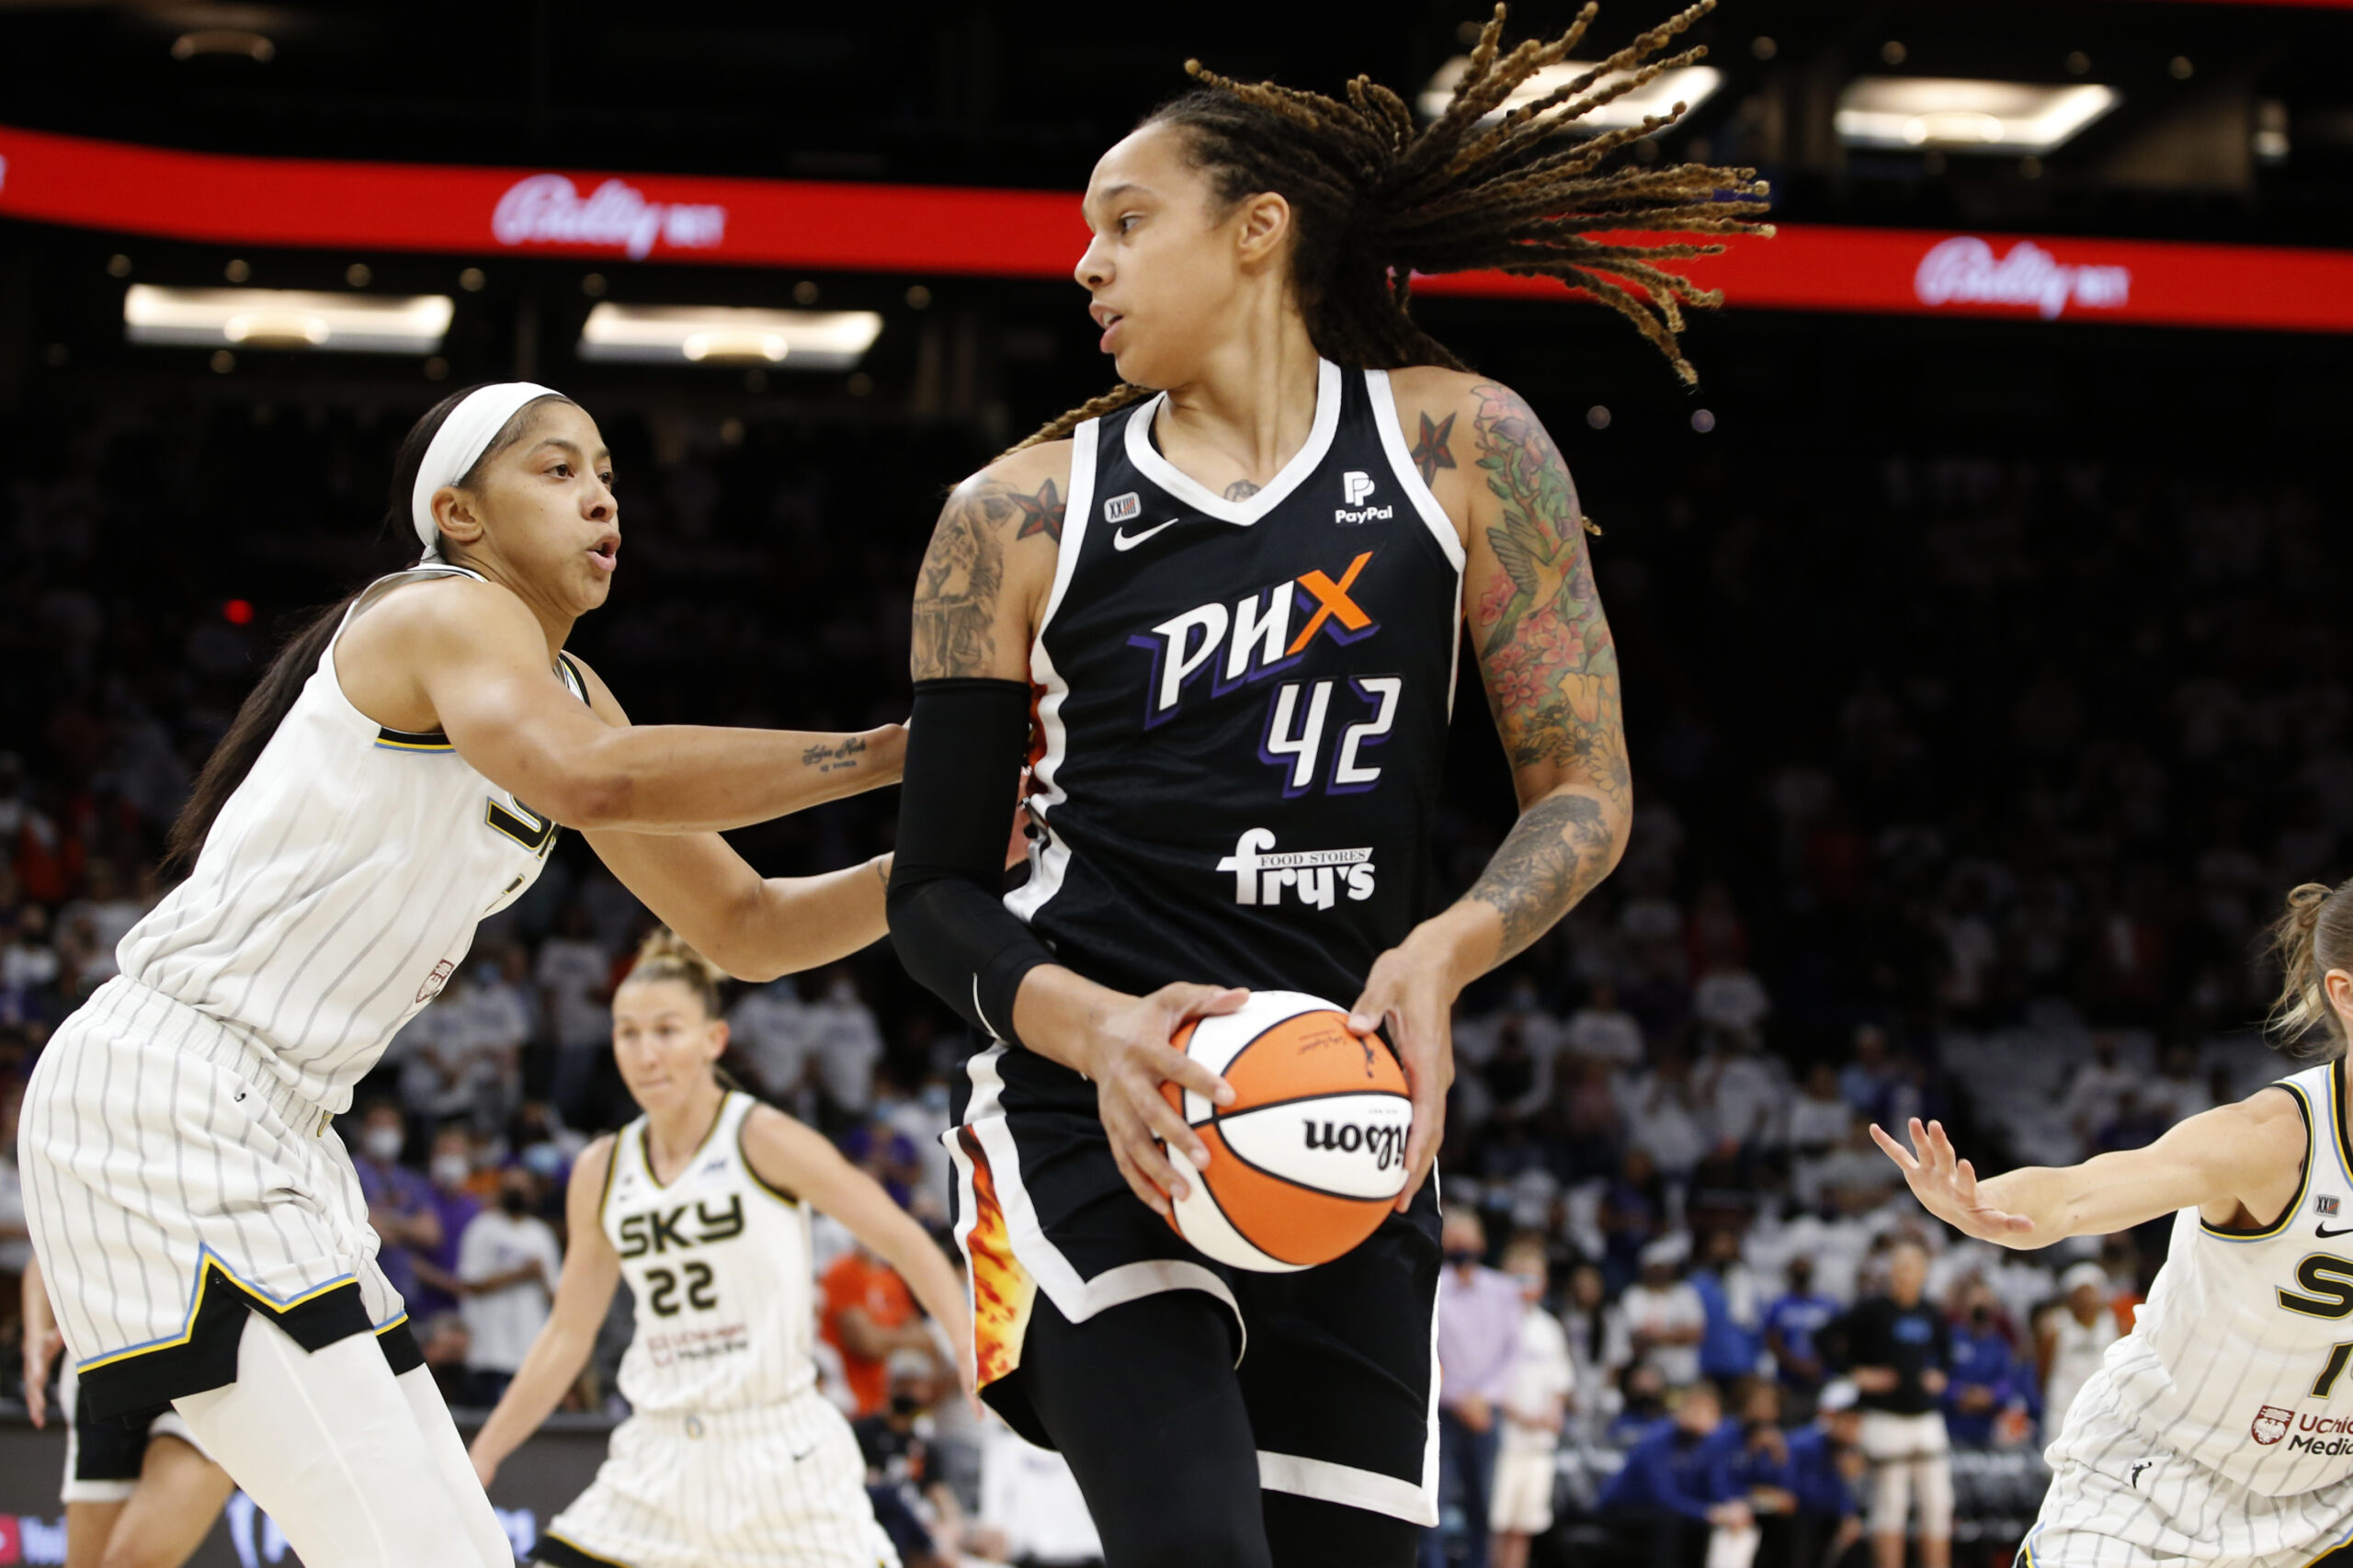 FILE - Phoenix Mercury center Brittney Griner (42) looks to pass as Chicago Sky center Candace Parker defends during the first half of game 1 of the WNBA basketball Finals , Sunday, Oct. 10, 2021, in Phoenix. Griner was arrested in Russia last month at a Moscow airport after a search of her luggage revealed vape cartridges. The Russian Customs Service said Saturday, March 5, 2022, that the cartridges were identified as containing oil derived from cannabis, which could carry a maximum penalty of 10 years in prison. The customs service identified the person arrested as a female player for the U.S. national team and did not specify the date of her arrest. (AP Photo/Ralph Freso, File)